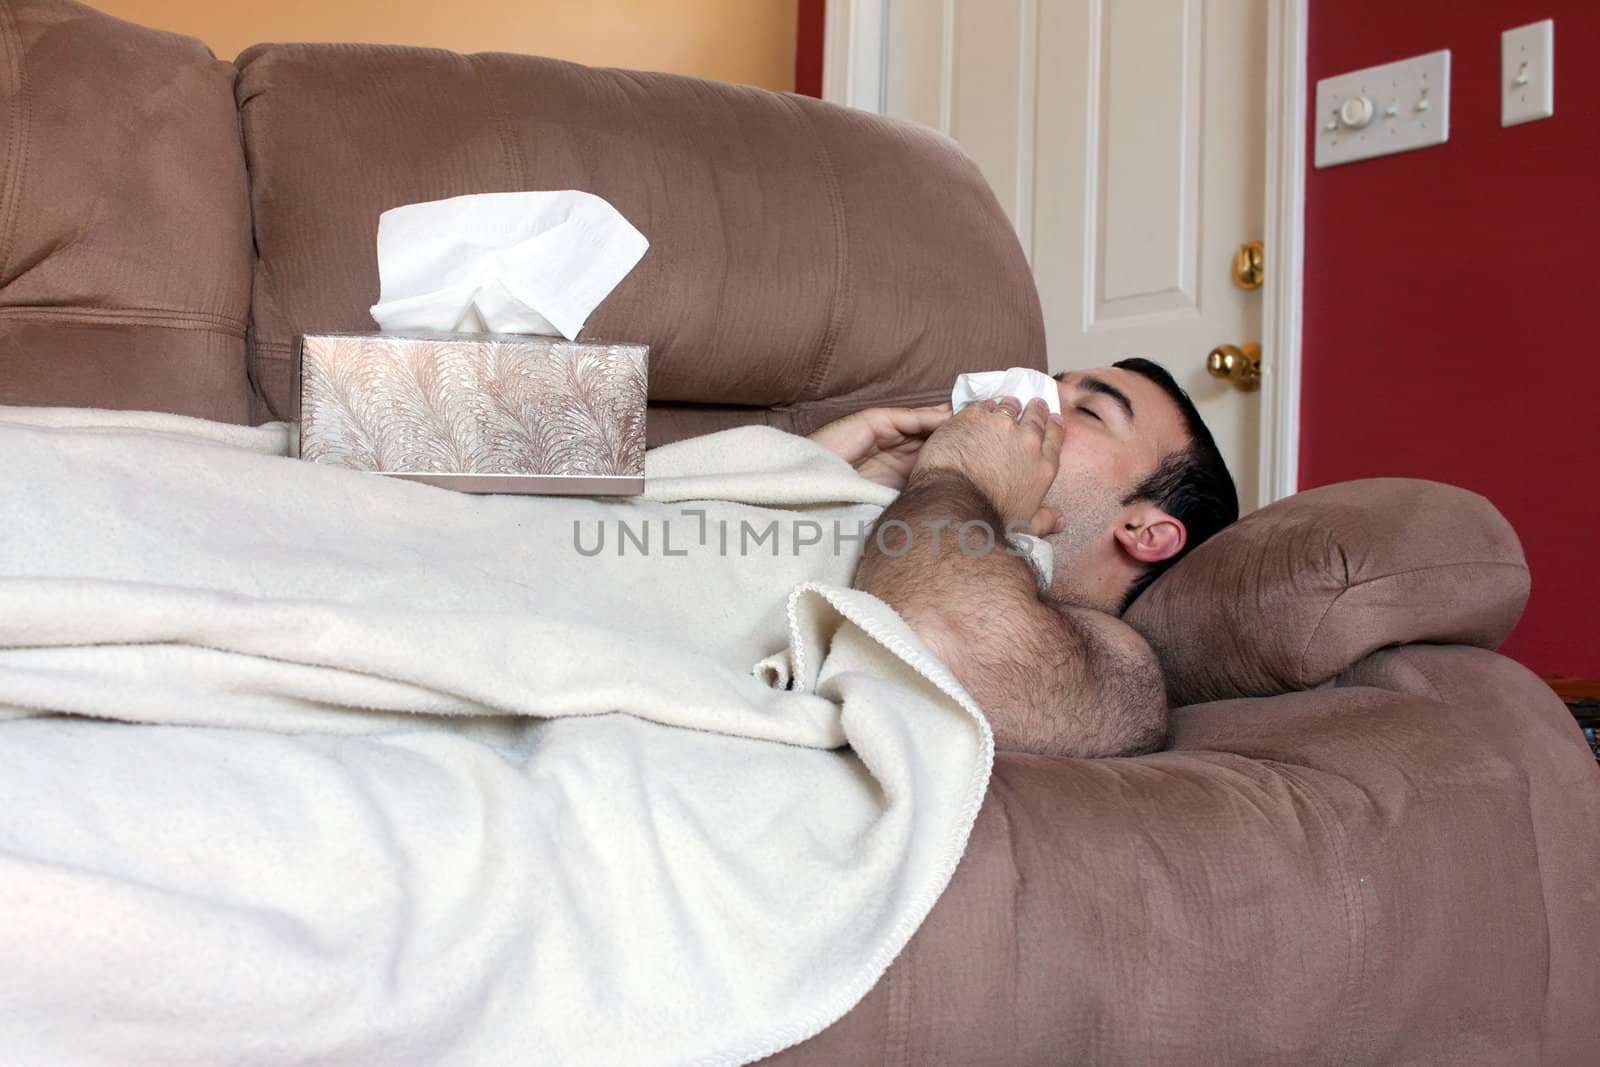 A young adult sick on the couch at home blows his nose with a tissue.